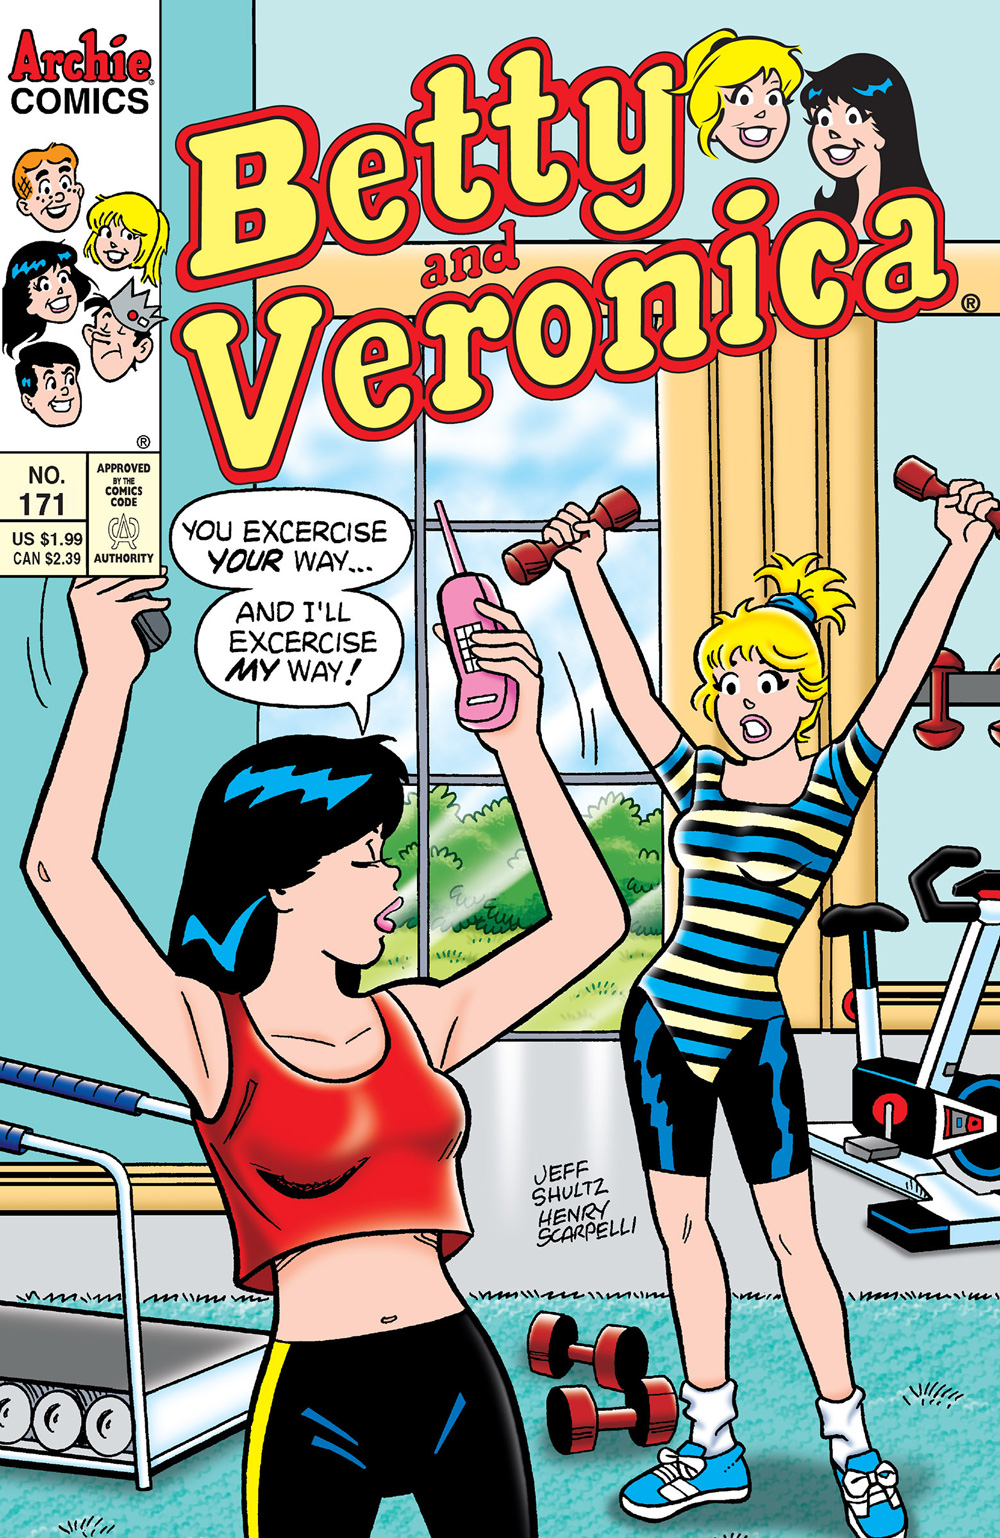 Betty and Veronica work out at the gym. Betty is lifting dumbbells and Veronica is lifting a cordless phone. She says she will exercise her own way.